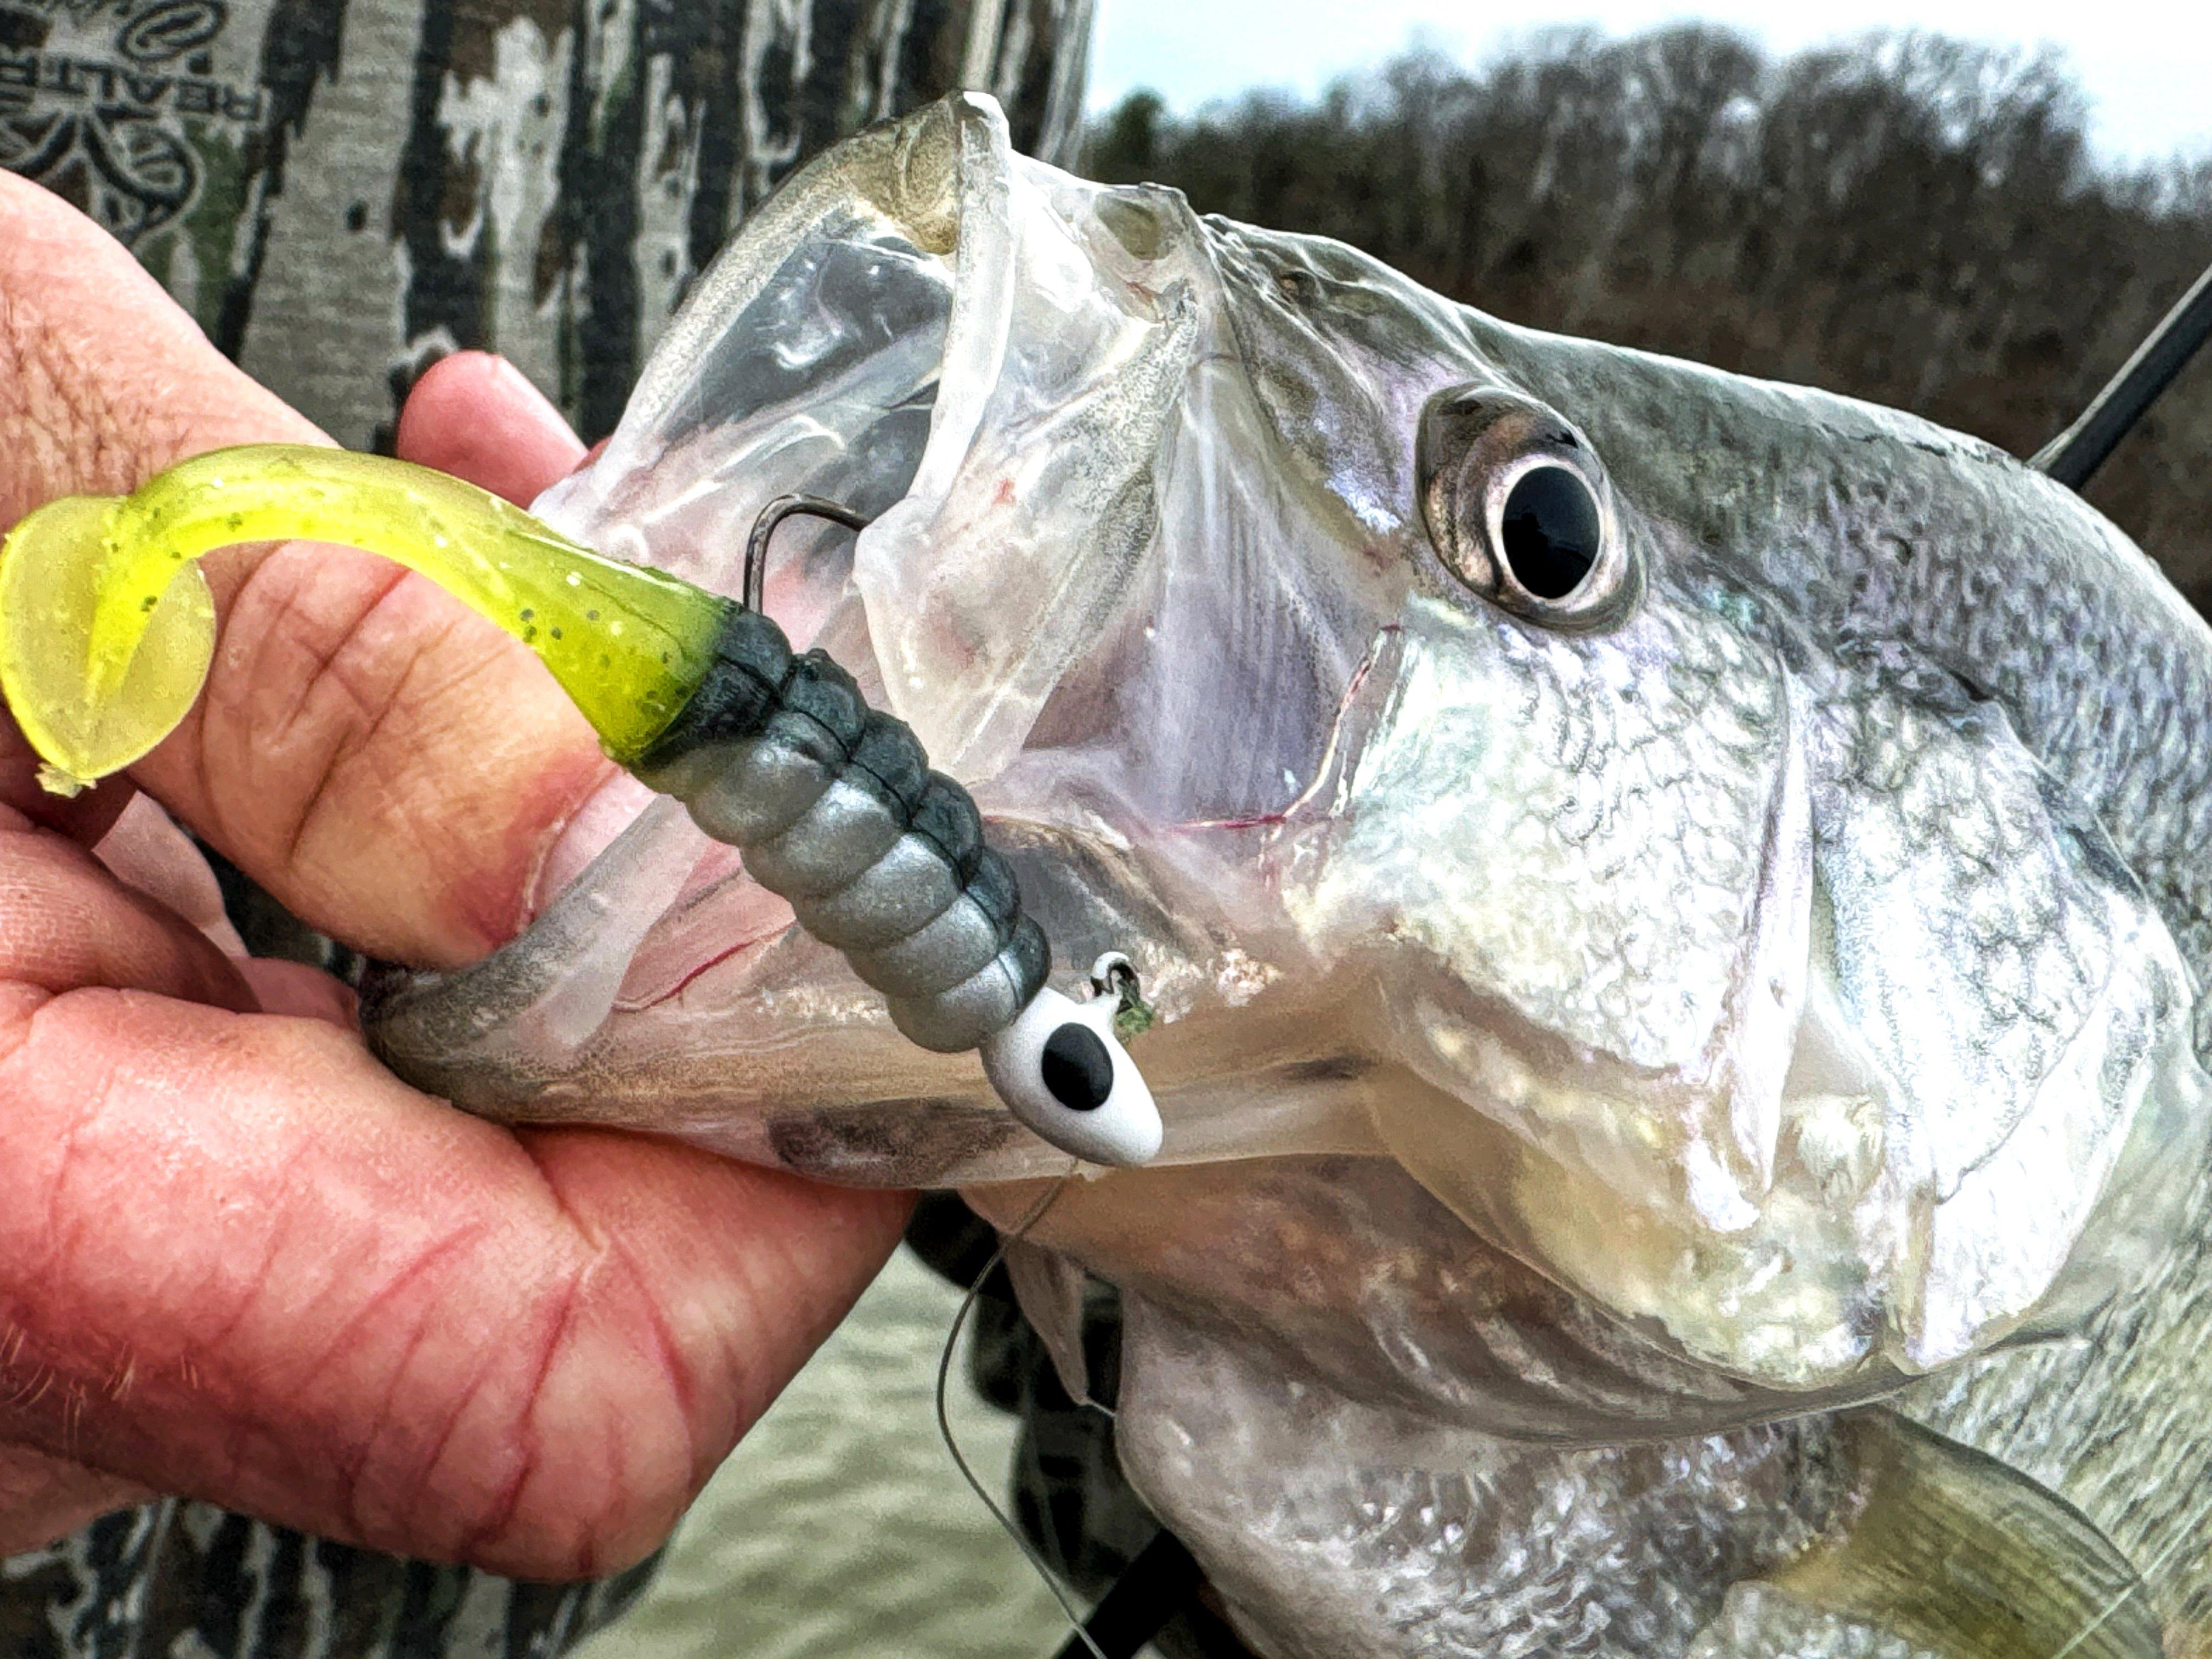 Best Lures for Crappie Fishing: Jigs vs. Minnows - Realtree Camo